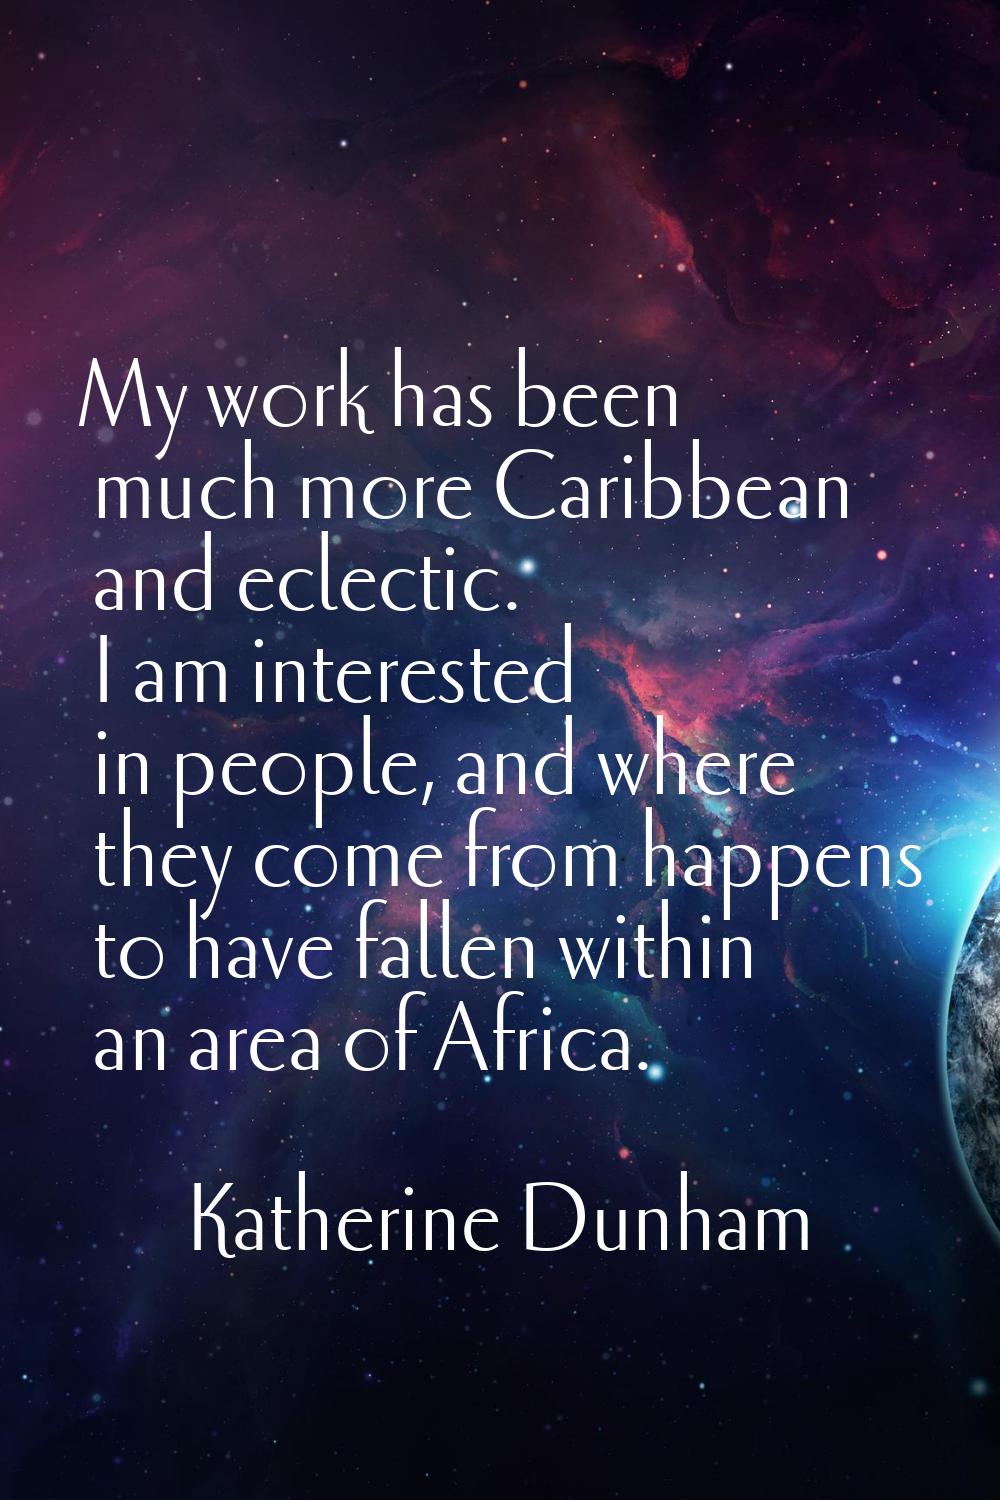 My work has been much more Caribbean and eclectic. I am interested in people, and where they come f